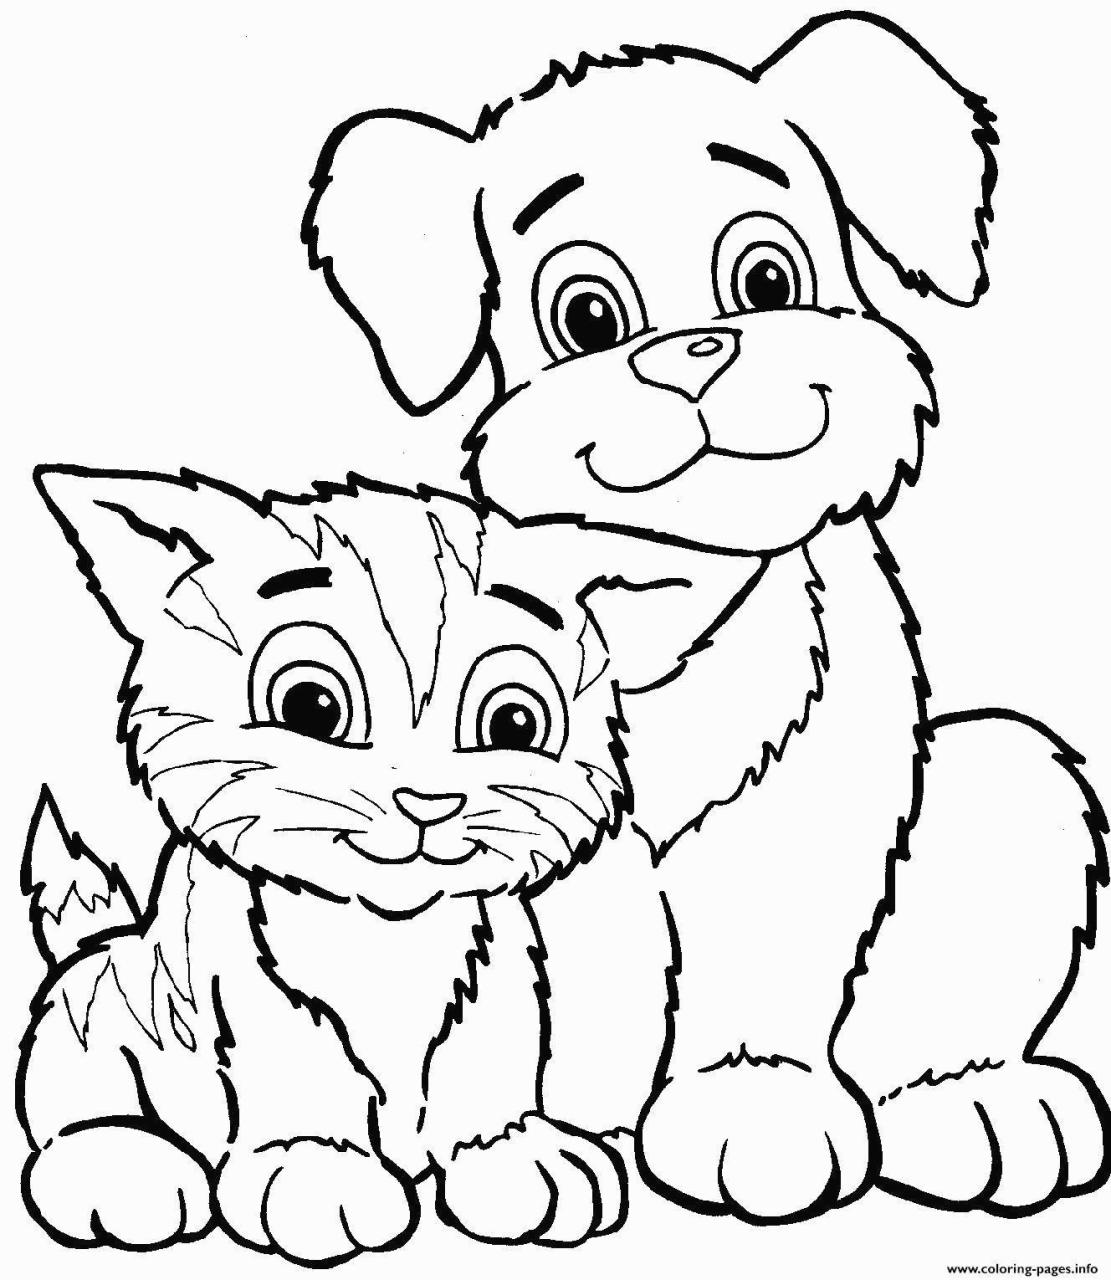 Kitty Cat And Dog Coloring Pages